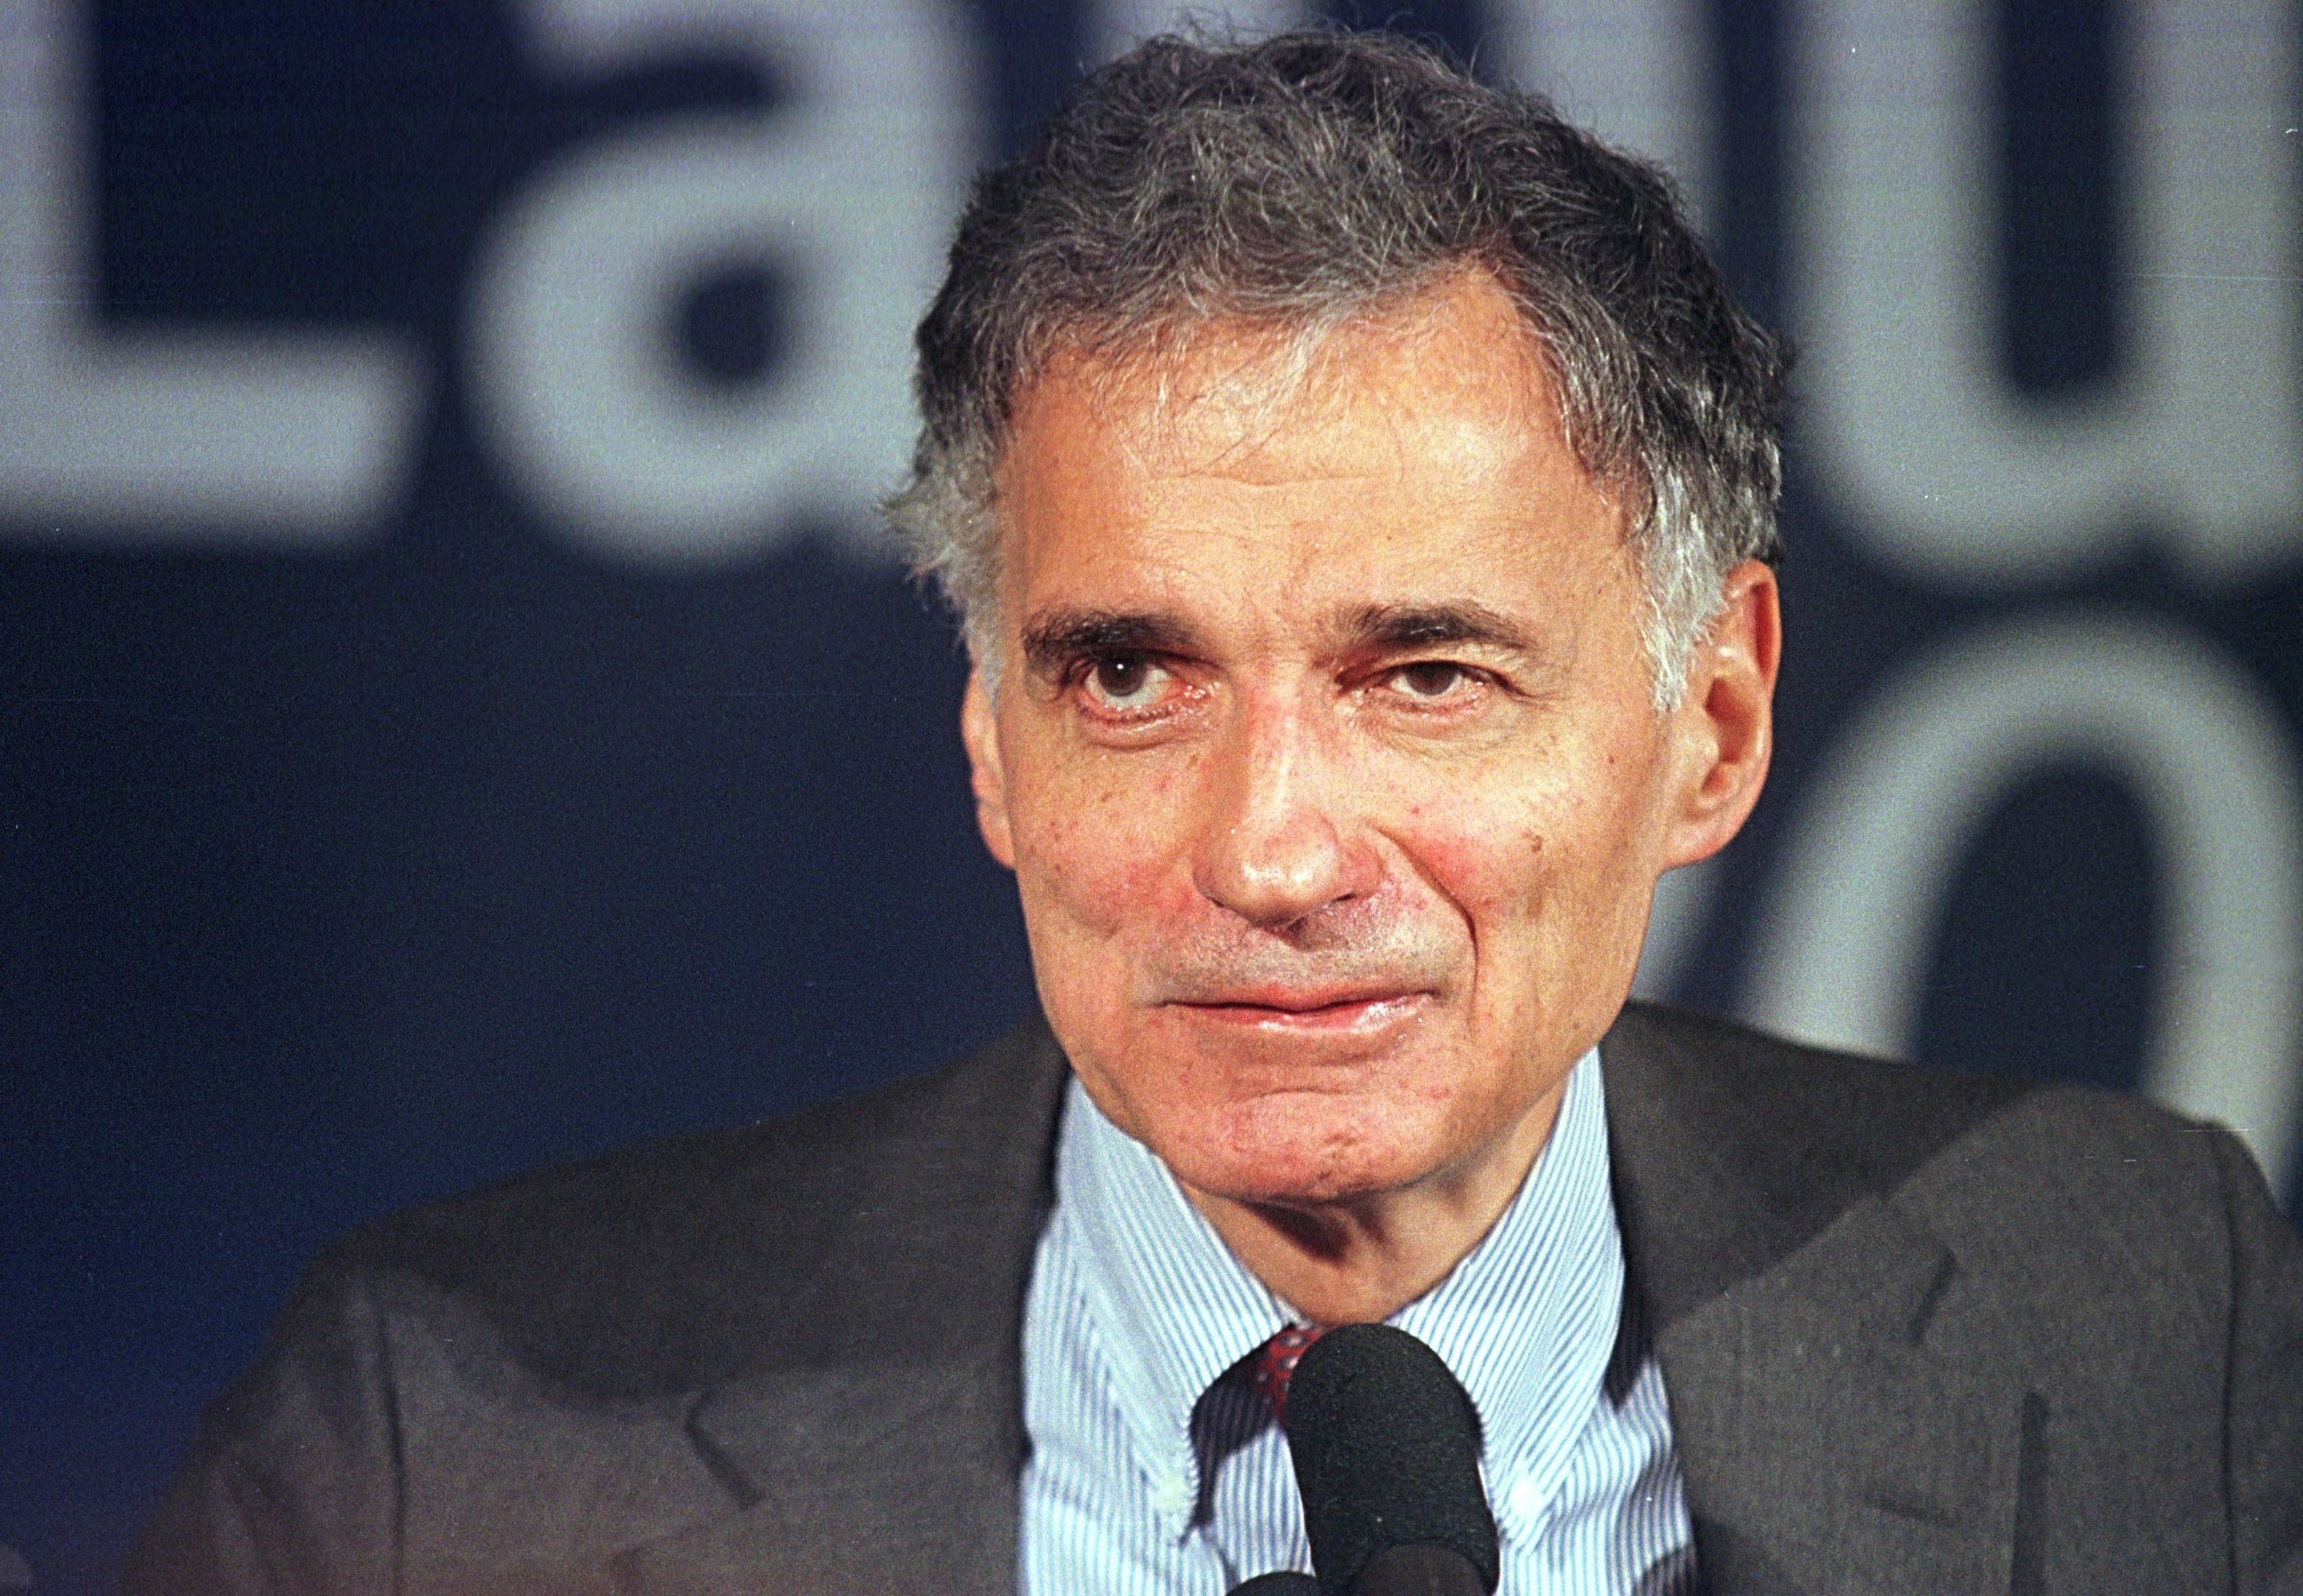 Ralph Nader at 88 A Lifetime of Advocacy and Enduring Influence